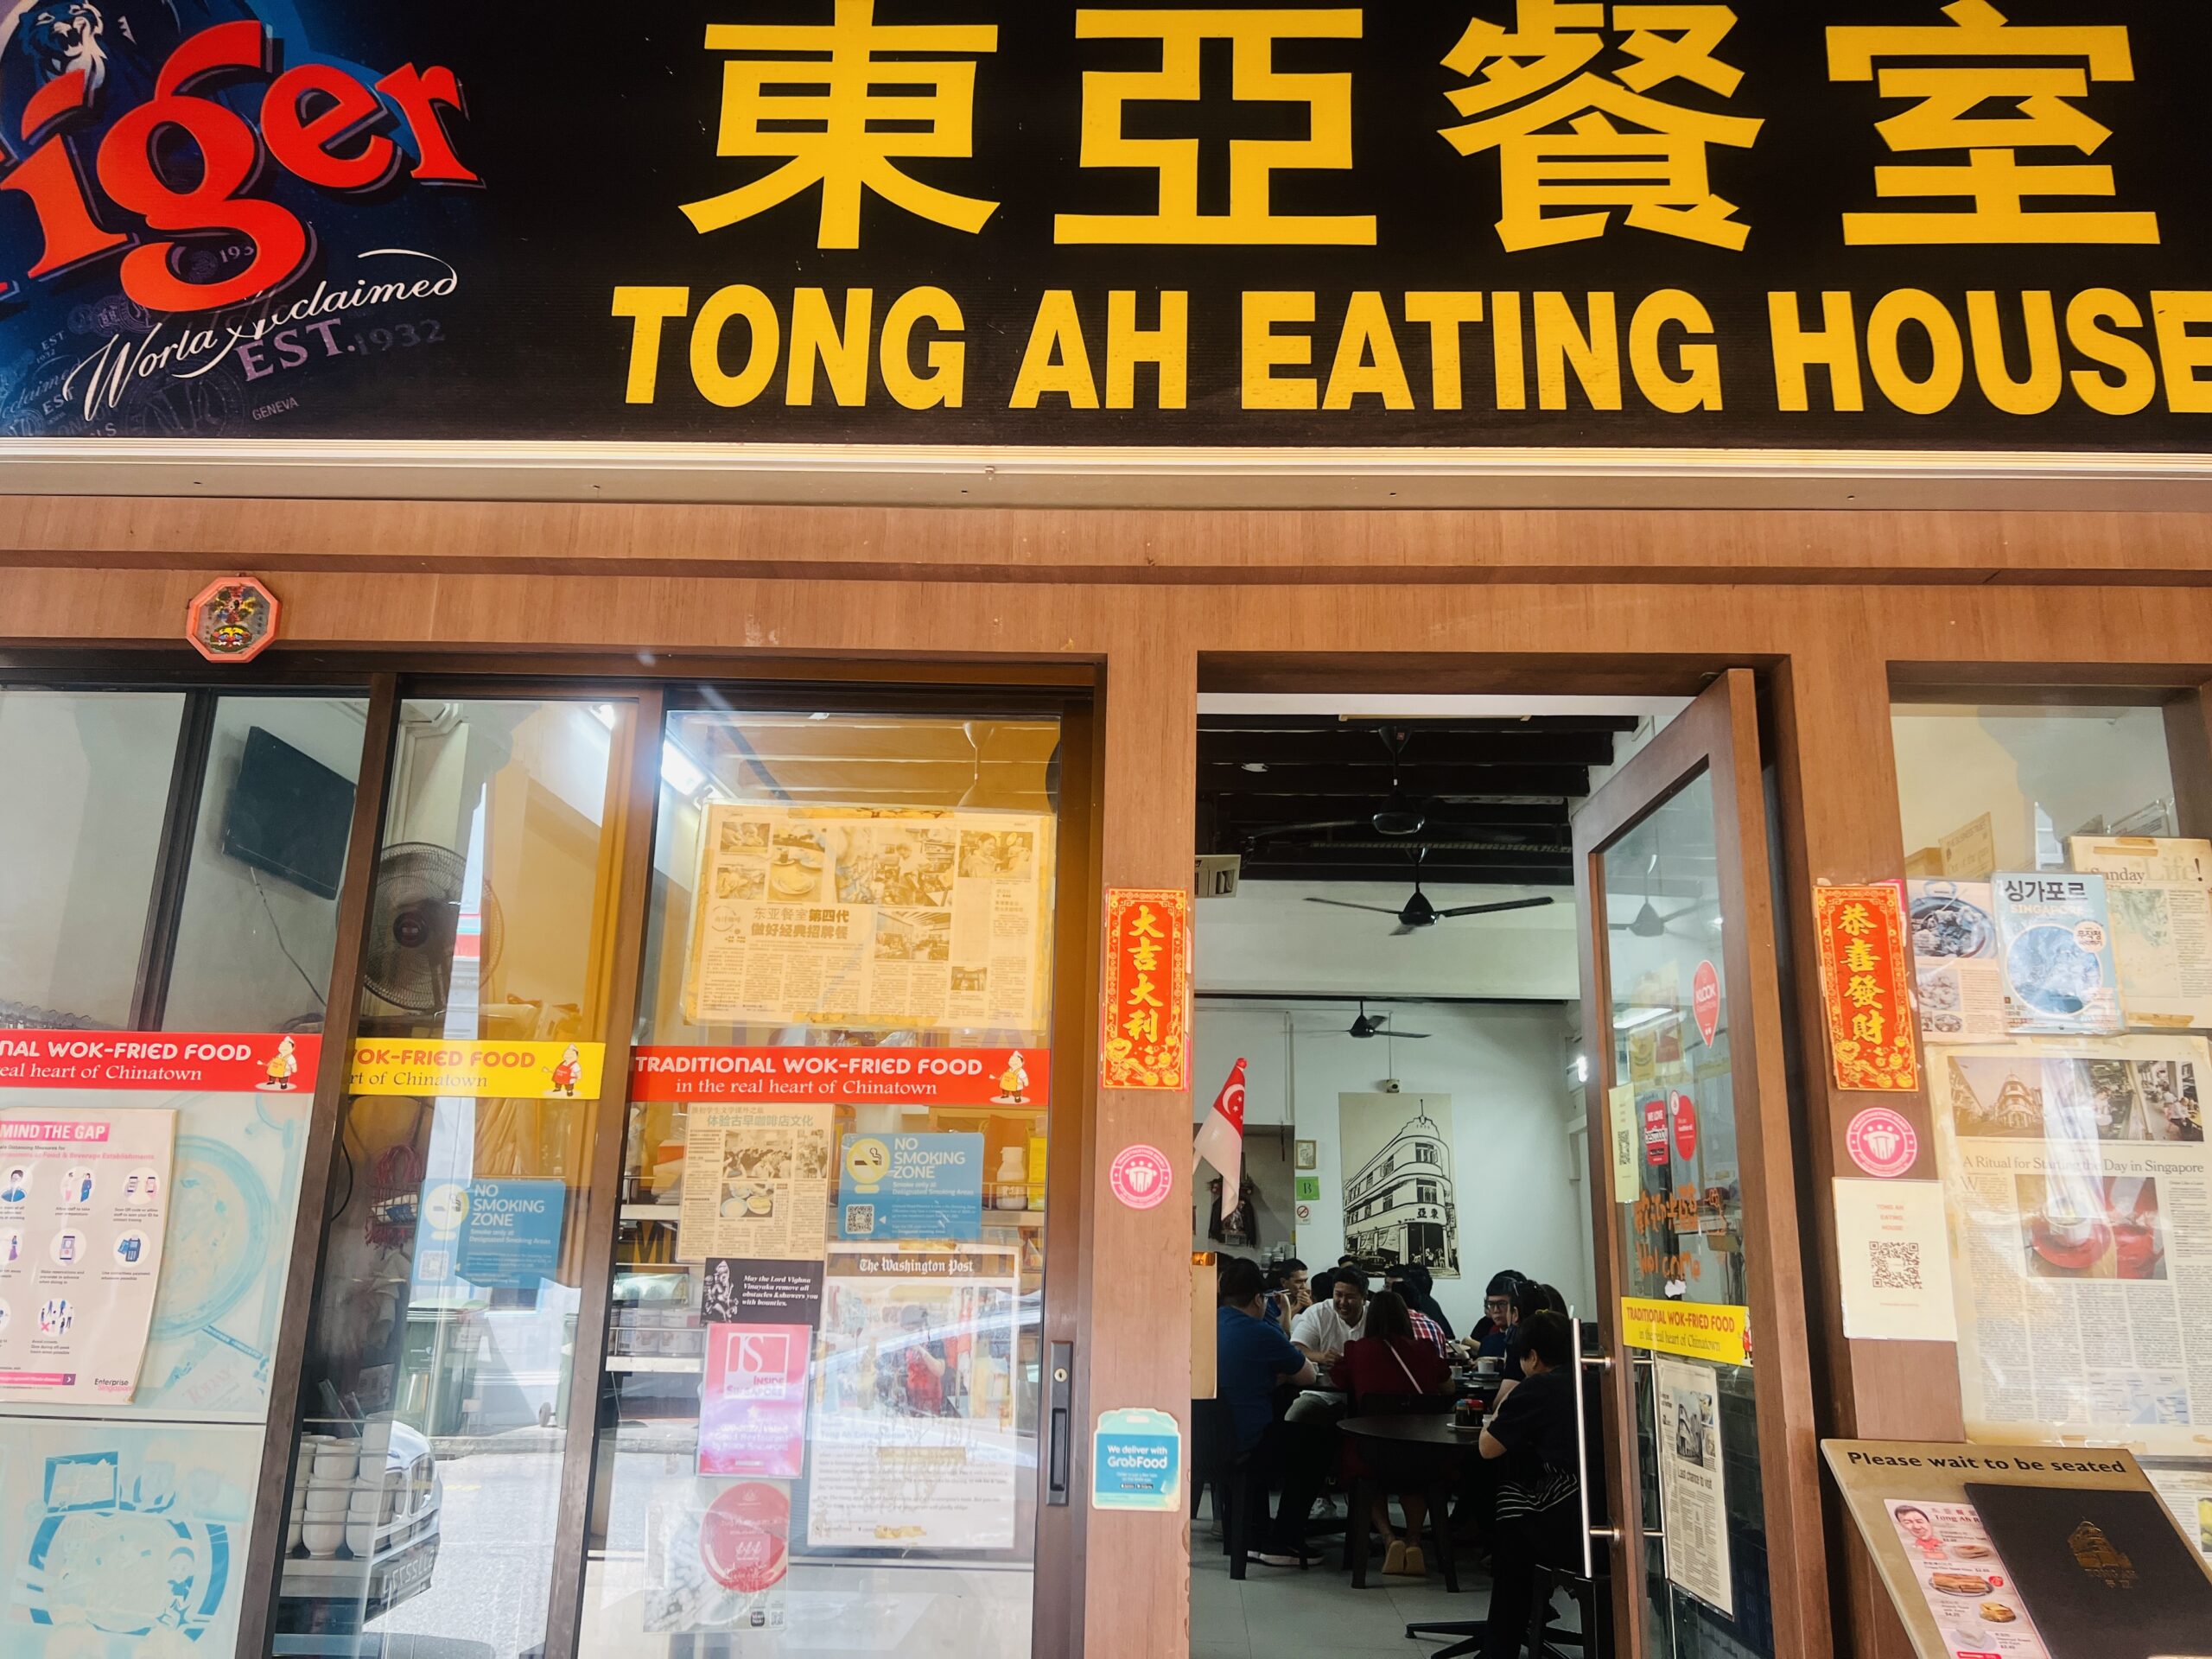 Tong Ah Eating House - Restaurant Front